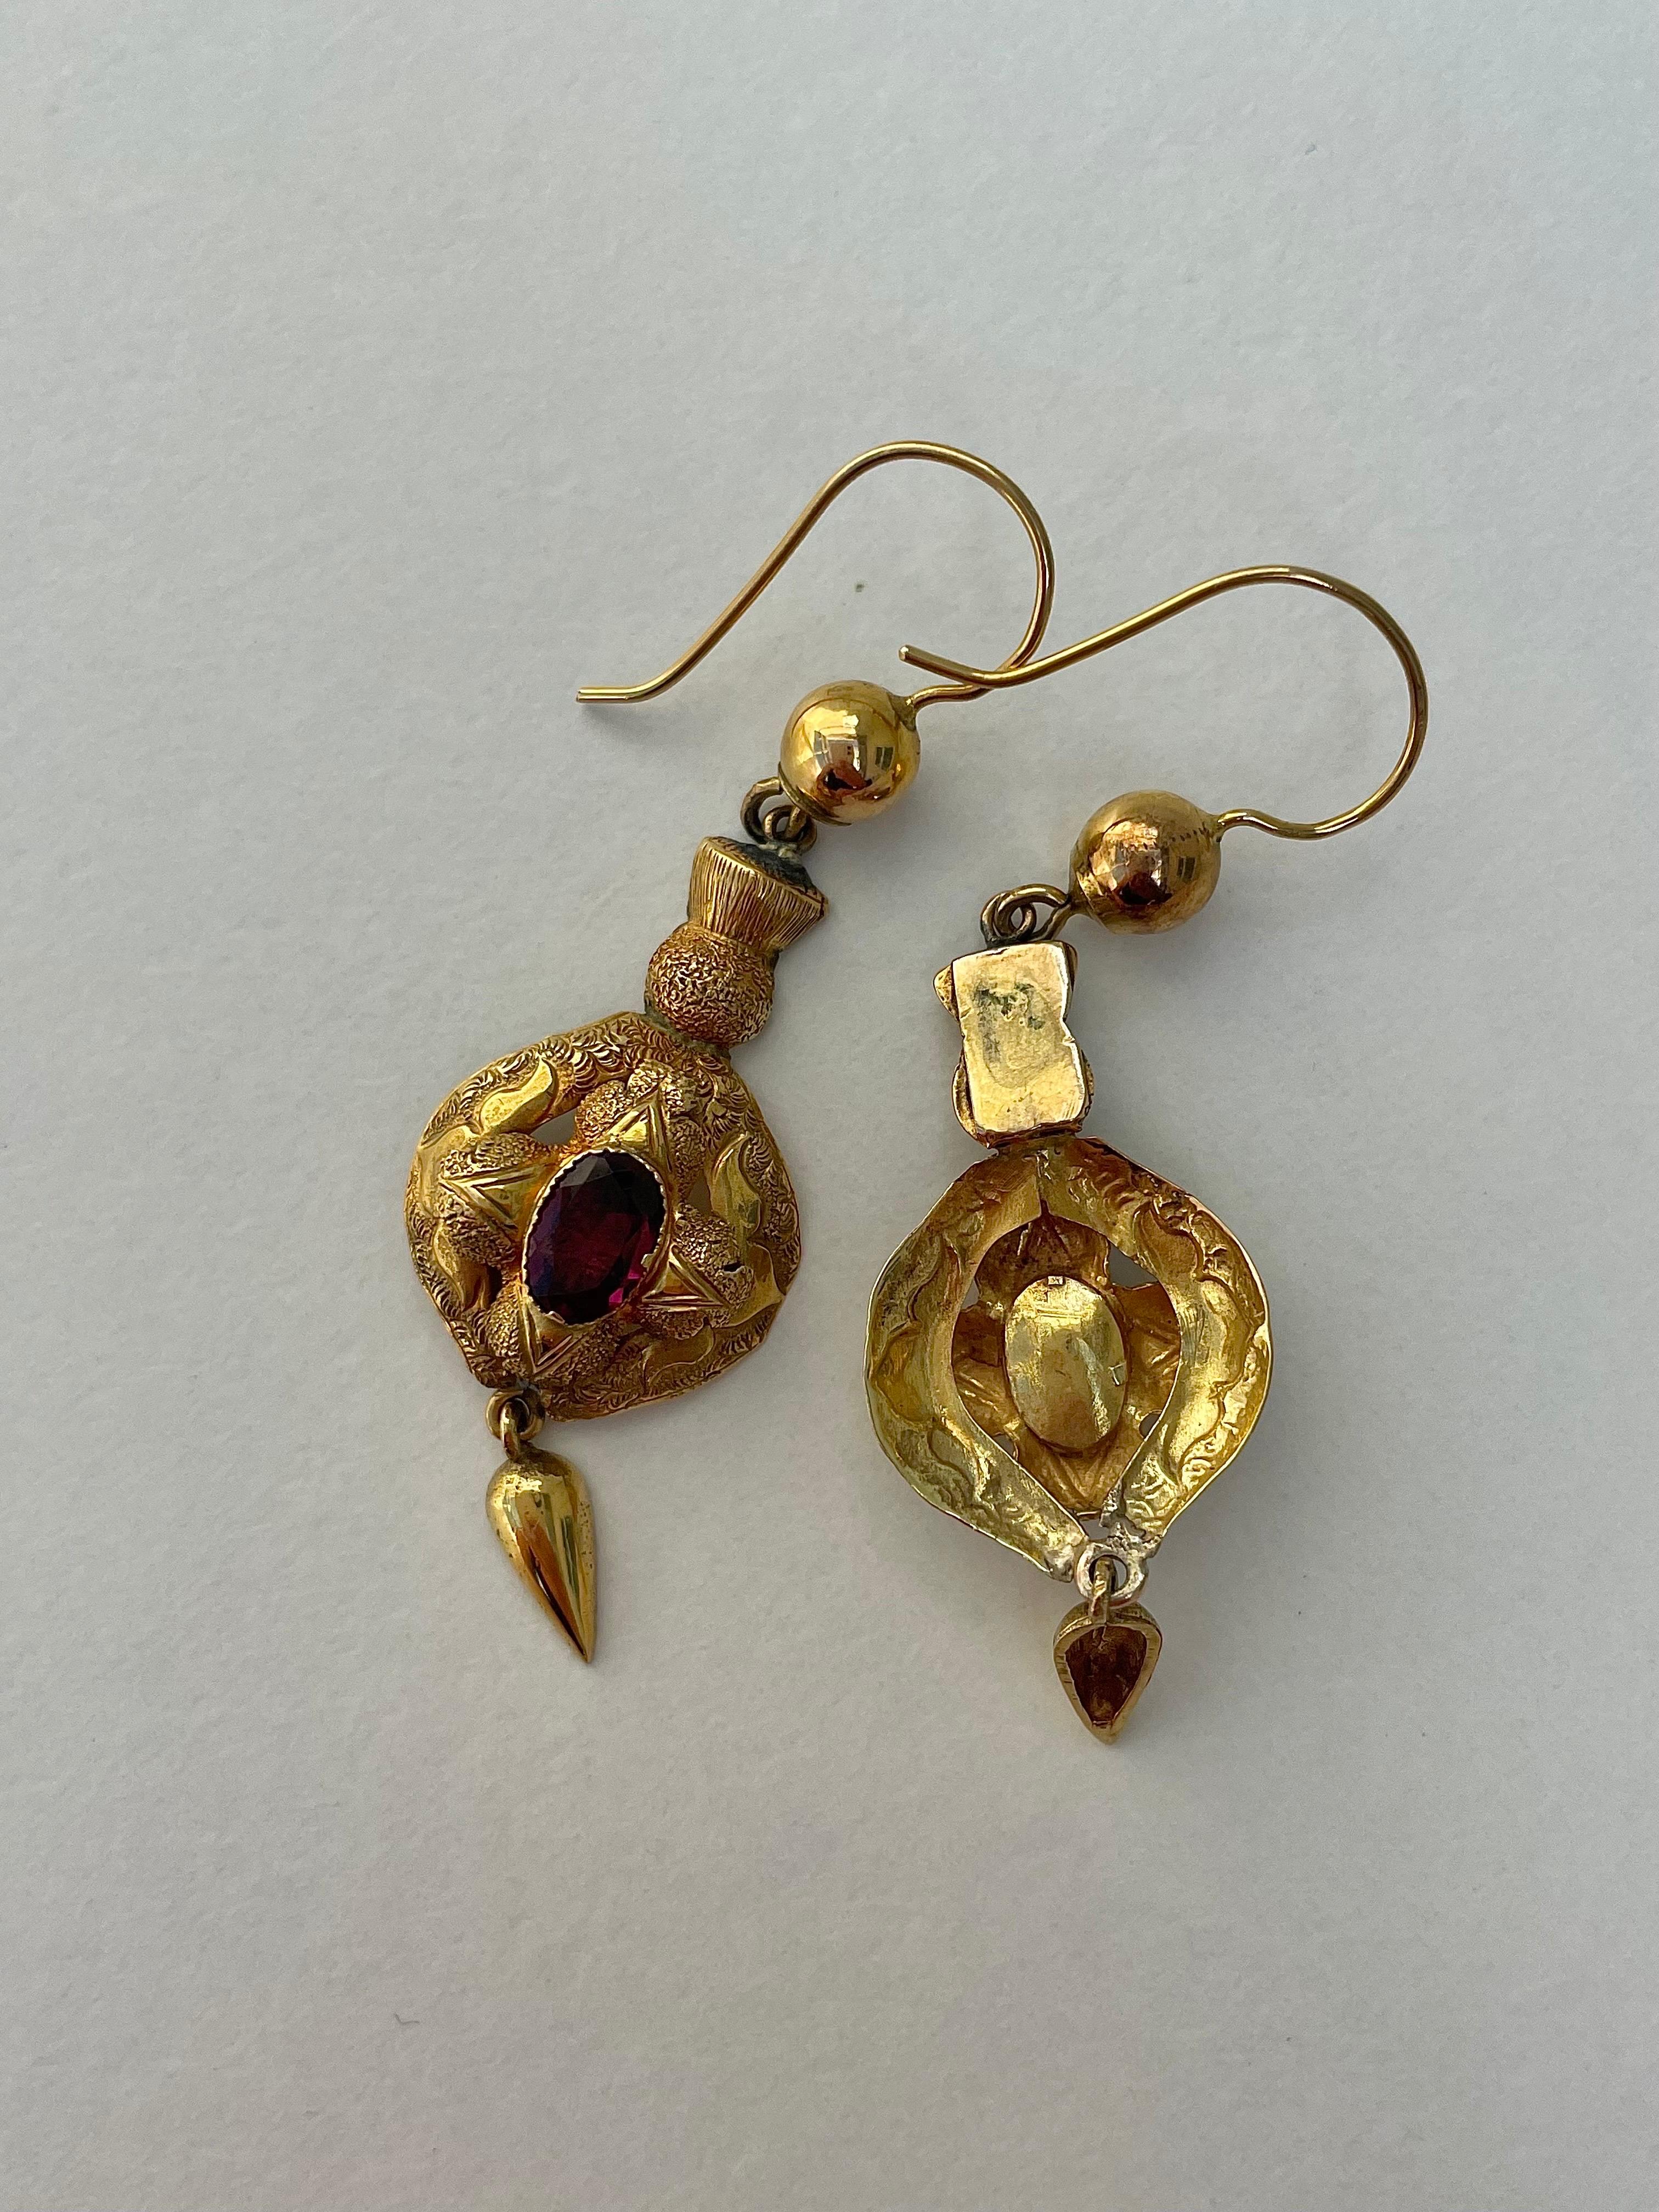 Antique Garnet and Gold Victorian Drop Earrings 

the most sweetest pair of drop earrings, delightful!

The item comes without the box in the photos but will be presented in a  gift box

Measurements: weight 4.44g, length 46.8mm, width